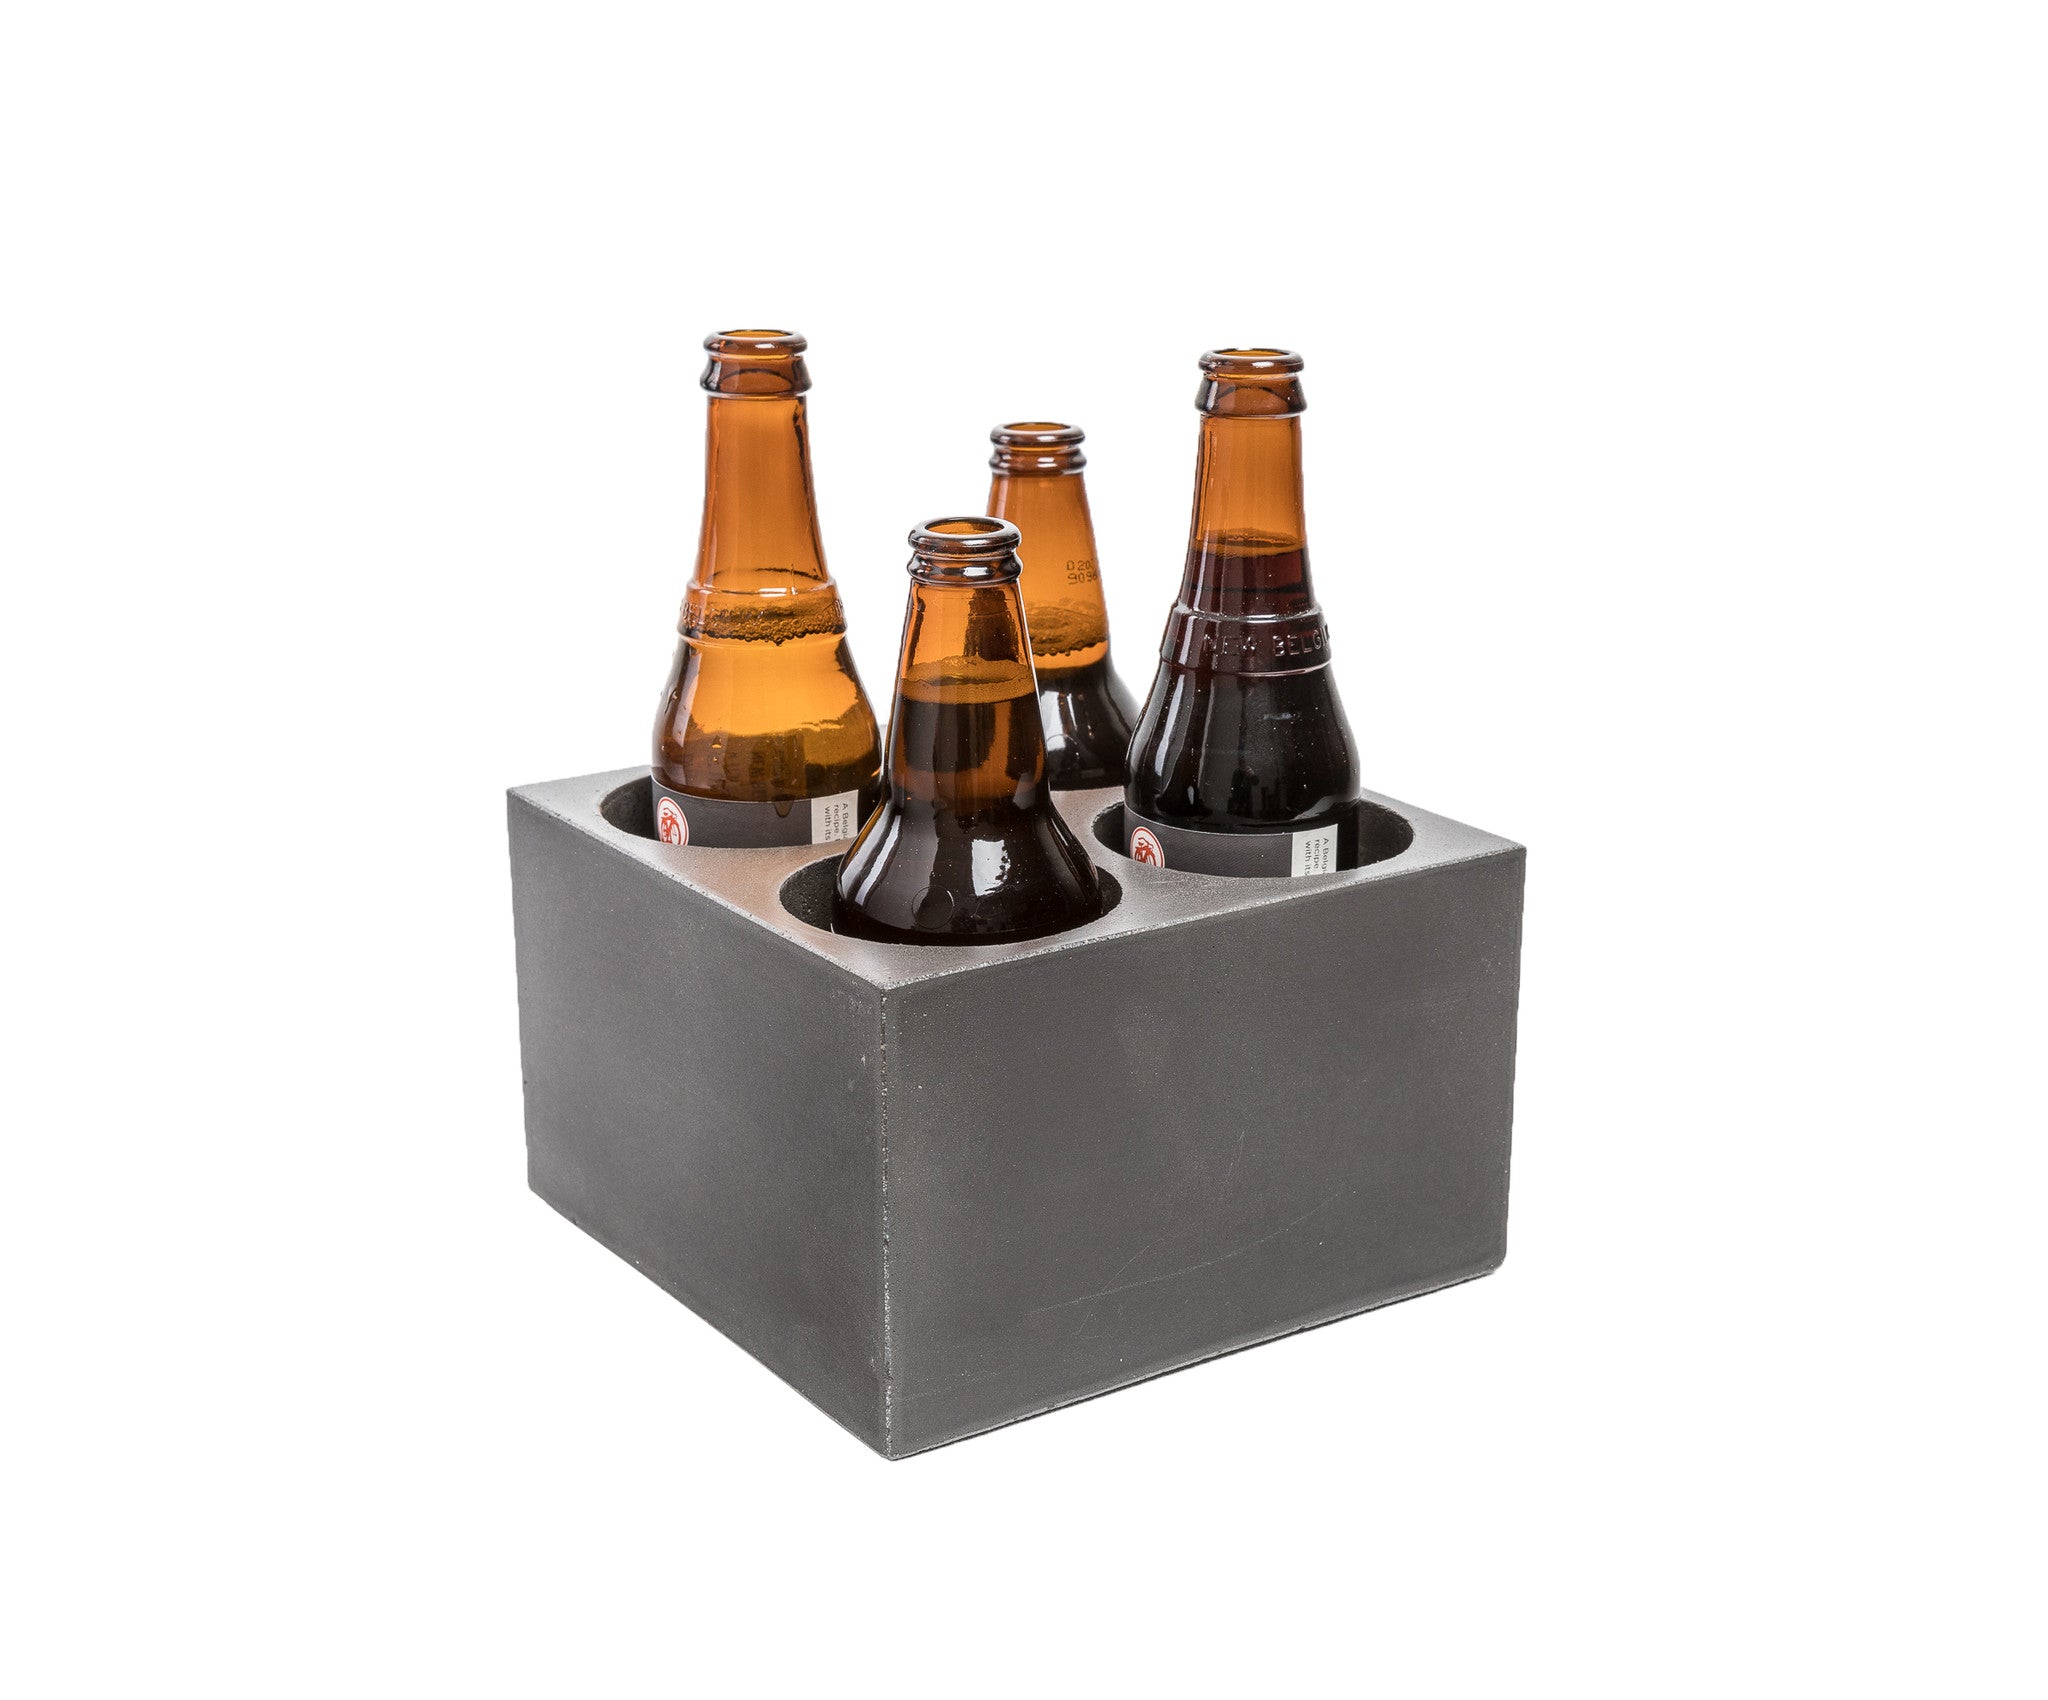 Concrete Beer Chiller (The Extrovert) - Angle 33